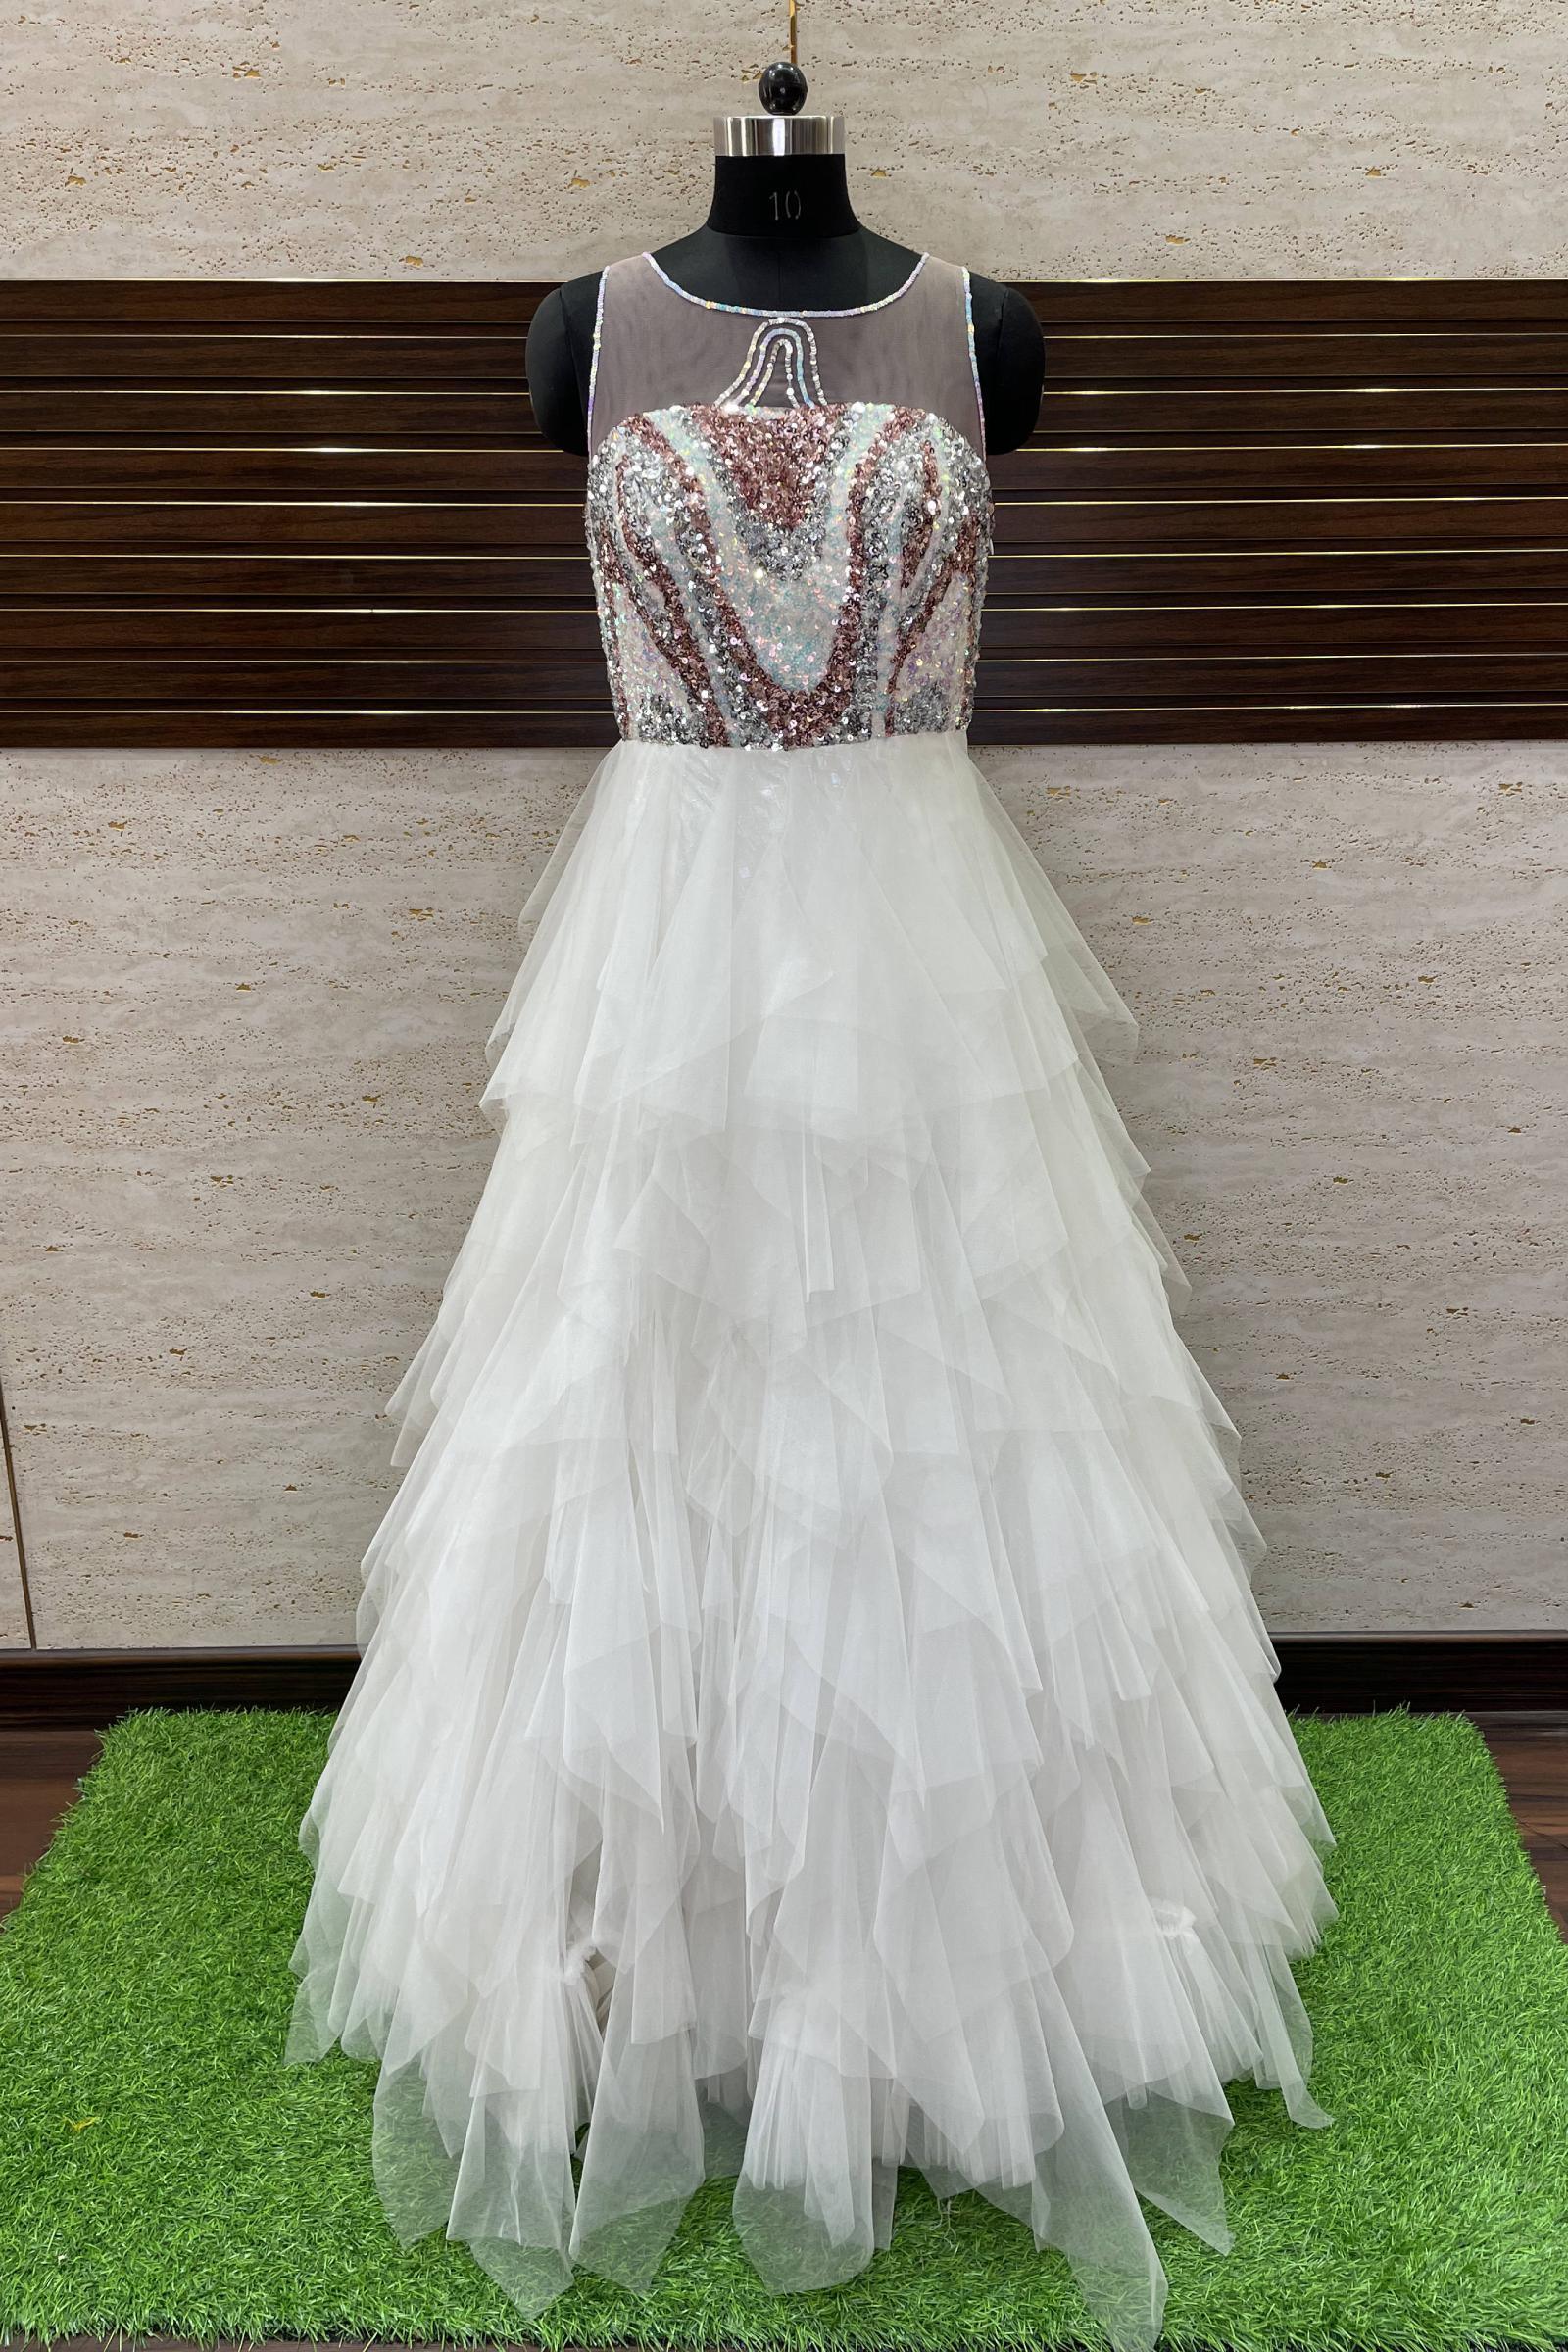 White Medium And Large Wedding Gown at Rs 2500 in Chennai | ID: 17811355230